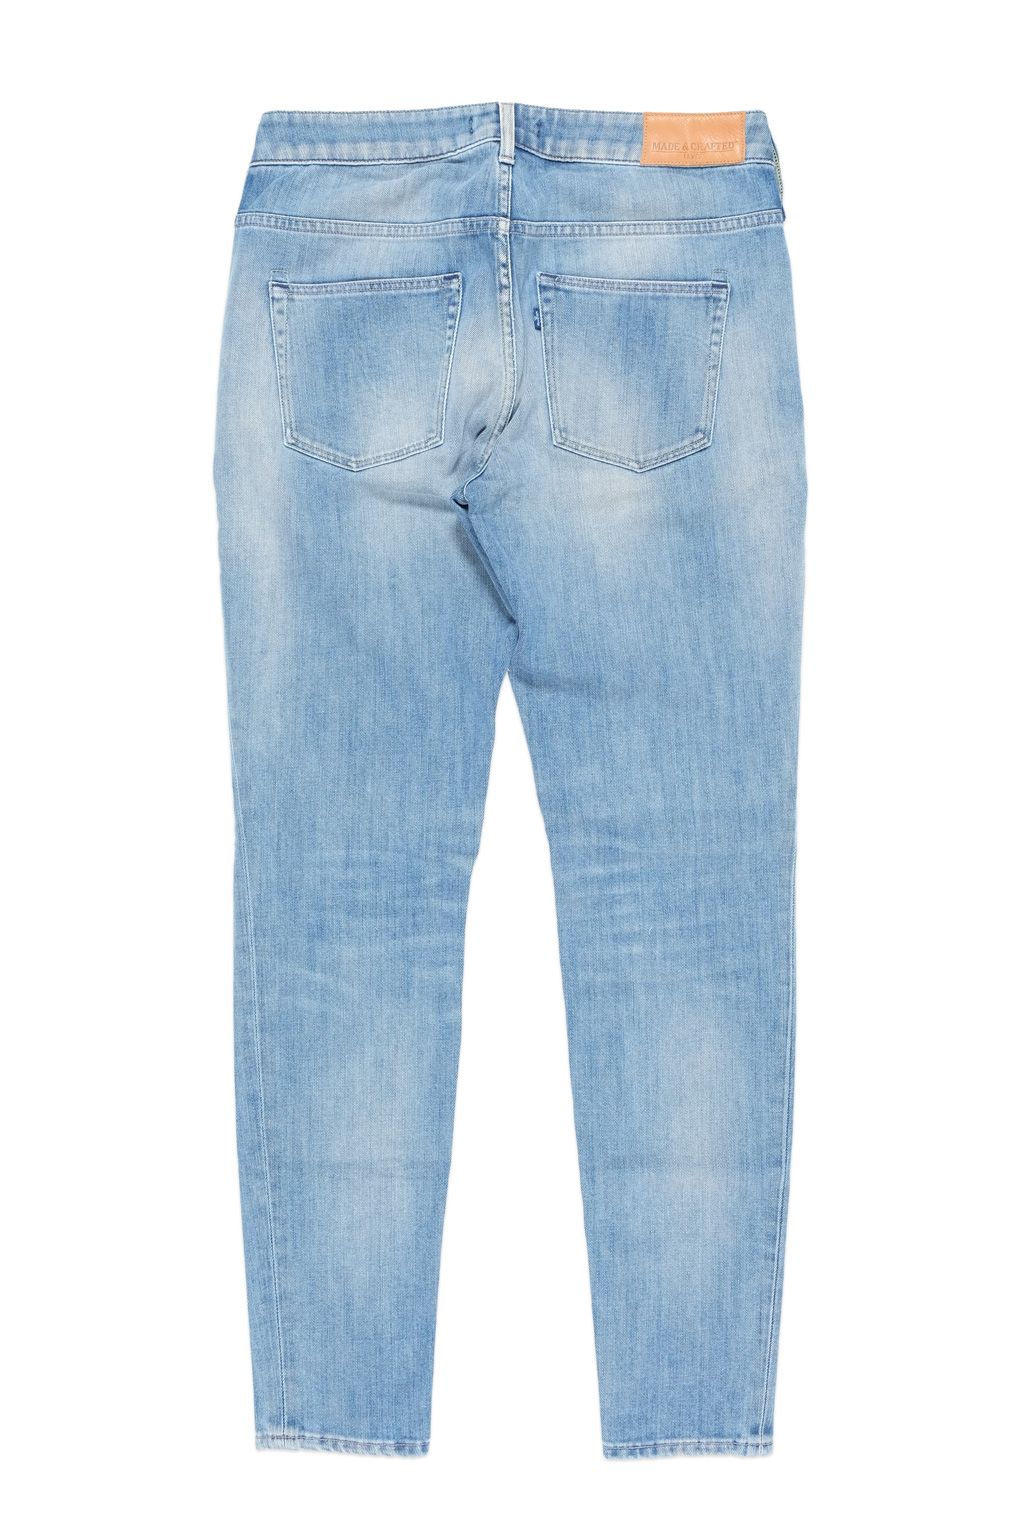 Sale 40% off - Levi's Made & Crafted Empire Female Jeans - E35 Shop